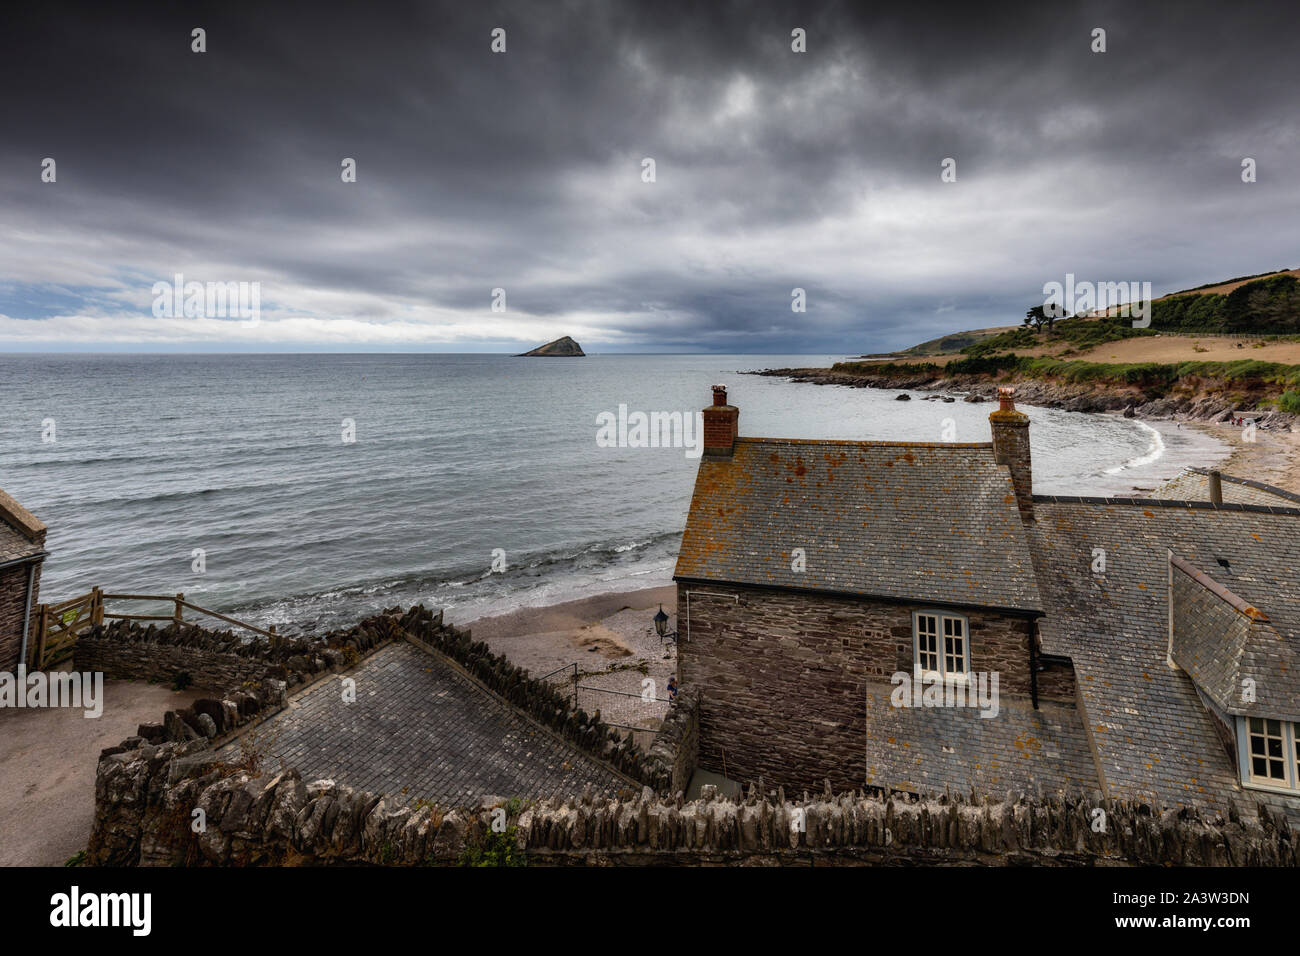 A 150-year old former water mill that overlooks the beach at Wembury, near Plymouth, Devon.  The rock in the distance is the Great Mew Stone. Stock Photo